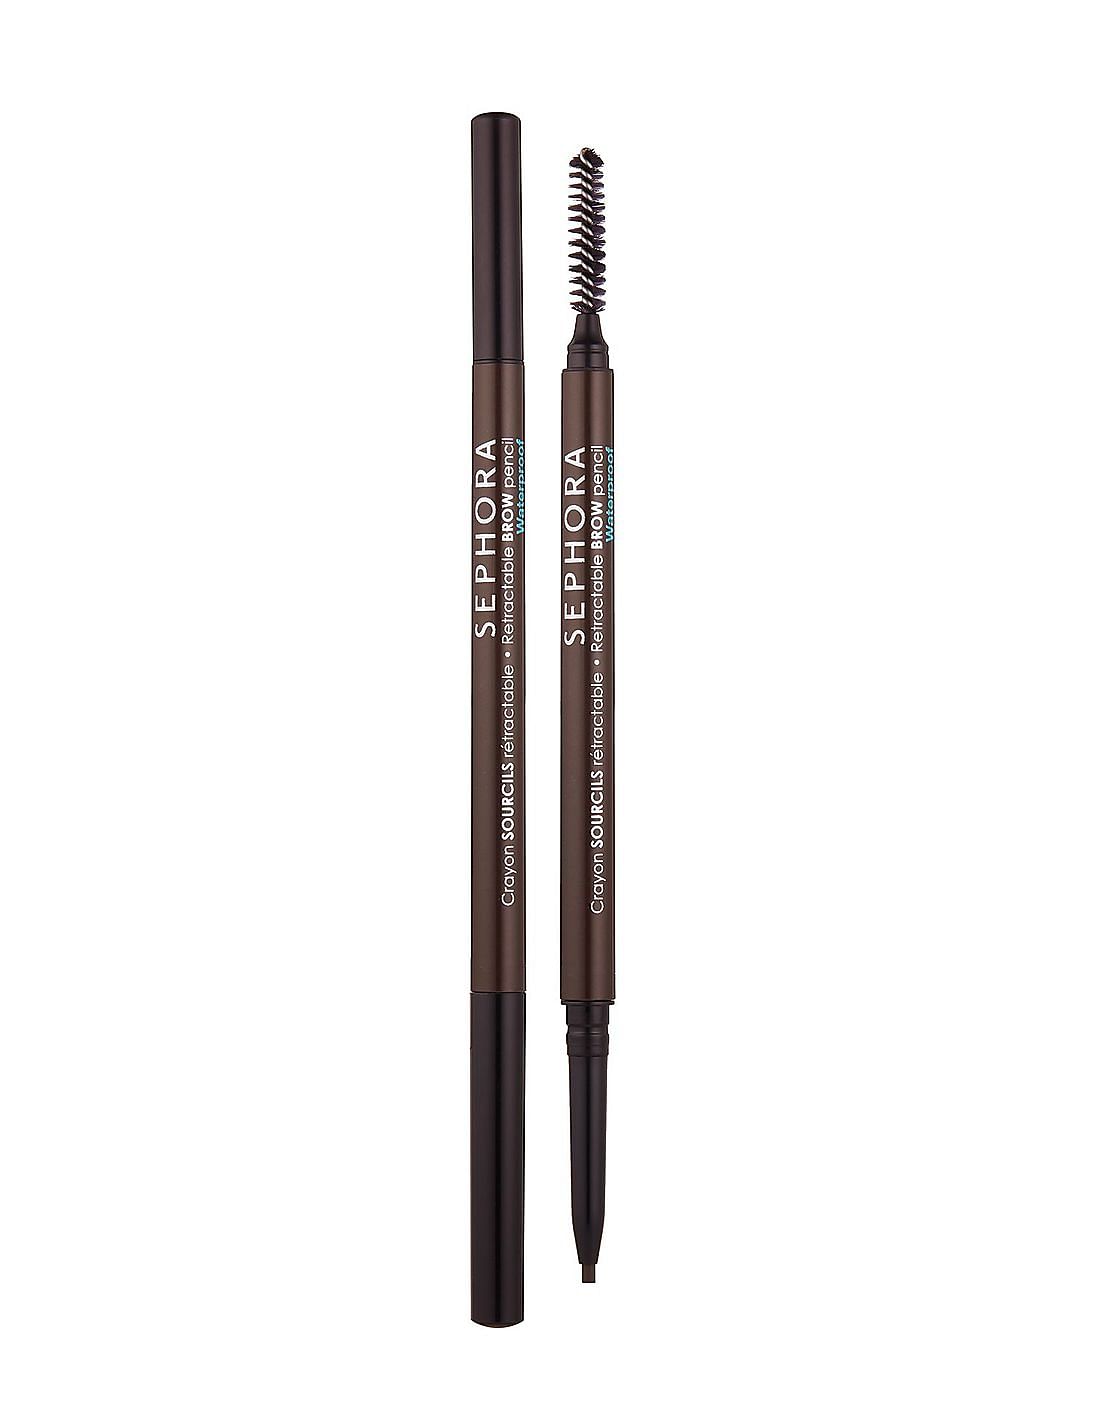 Sephora Collection Retractable Waterproof Brow Pencil - 06 Soft Charcoal, Brown (0.2 gm)